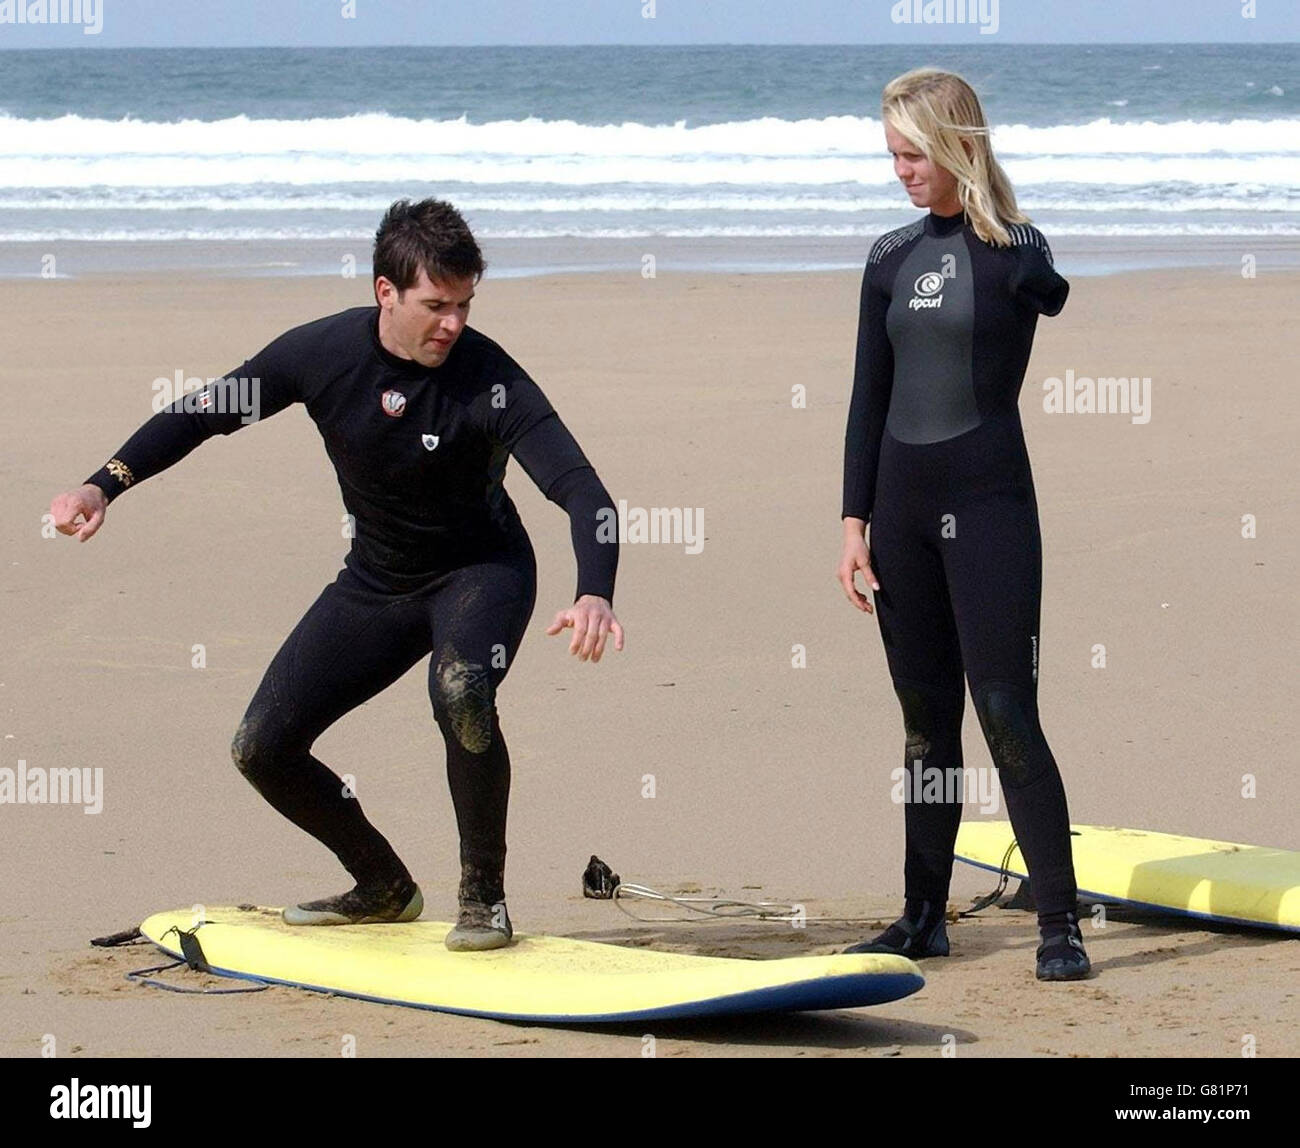 Bethany Hamilton, 15, gives some surfing tuition to new Blue Peter presenter Gethin Jones, 26, on the beach at Watergate Bay, near Newquay, where she was teaching new Blue Peter presenter Gethin Jones, 26, to surf for a future episode of the children's TV programme. The teenage surfer from Hawaii lost her left arm when she was attacked by a 14ft tiger shark while she was surfing near Tunnels Beach on Kauai on October 31, 2003, when she was 13. Stock Photo